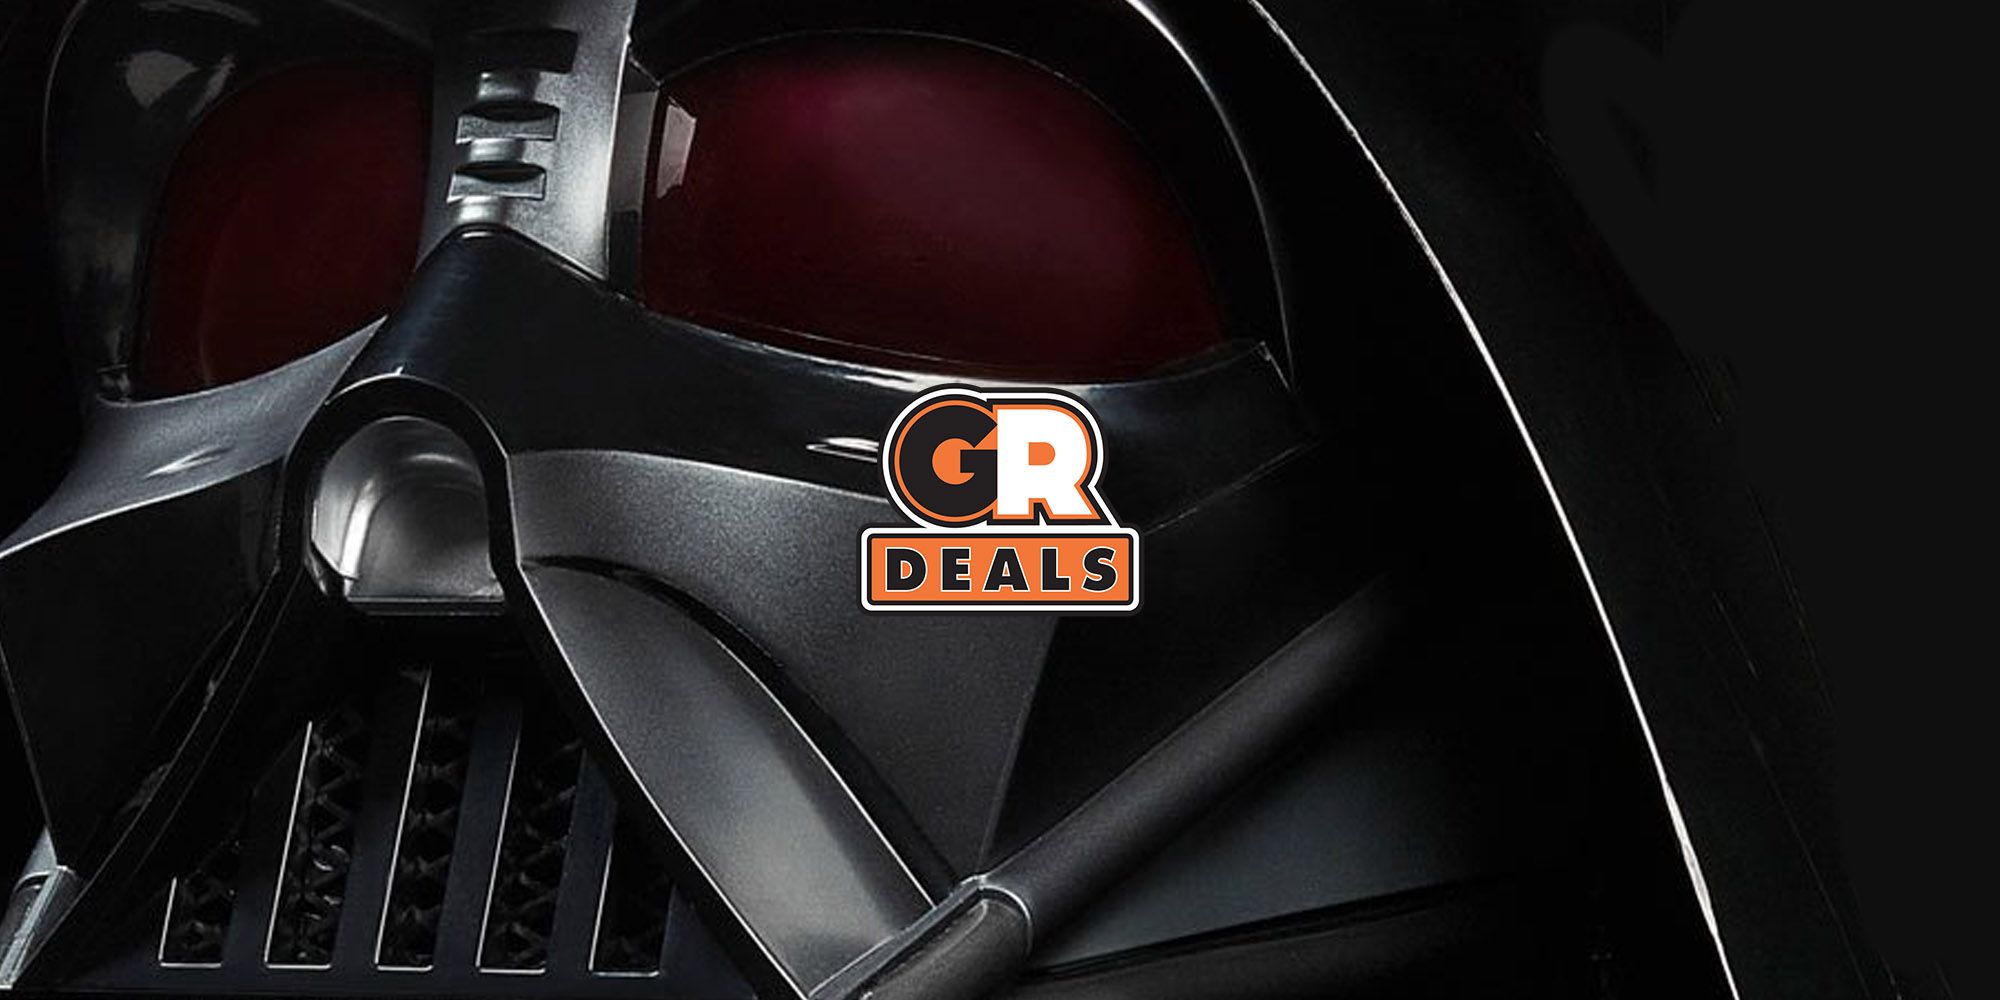 The Star Wars Darth Vader Replica Helmet Is Back & Fans Won't Want To Miss Out